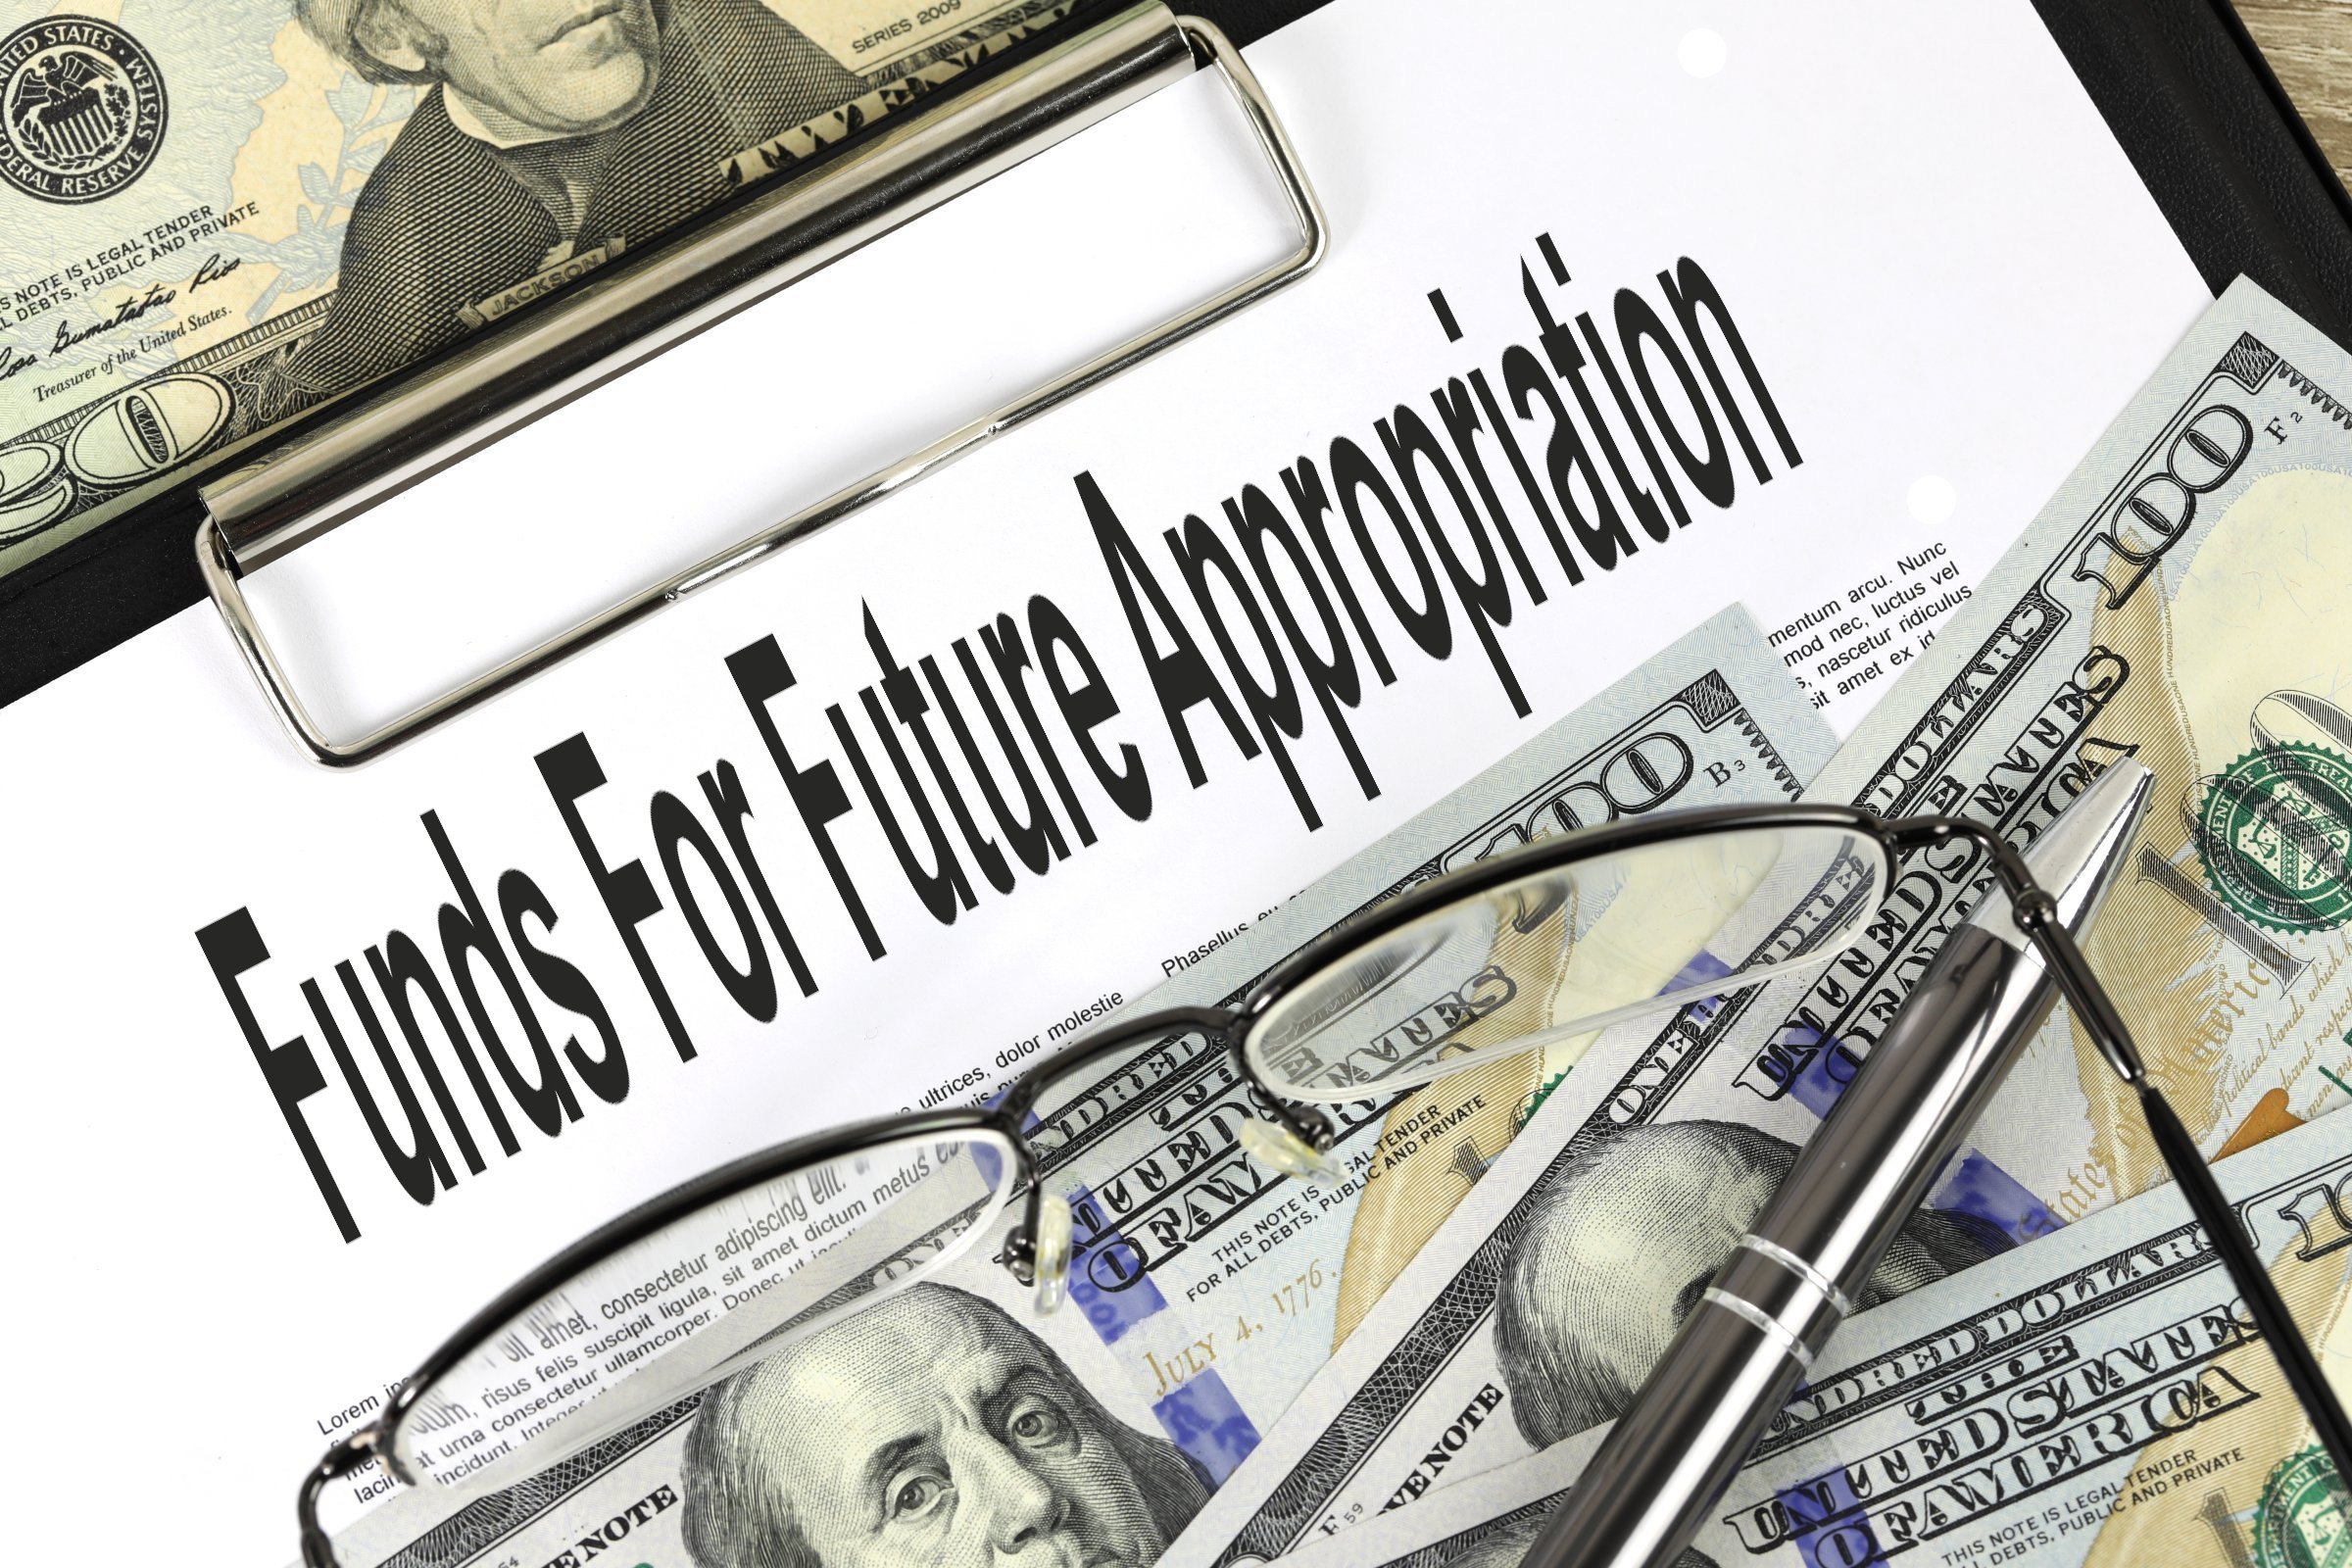 funds for future appropriation